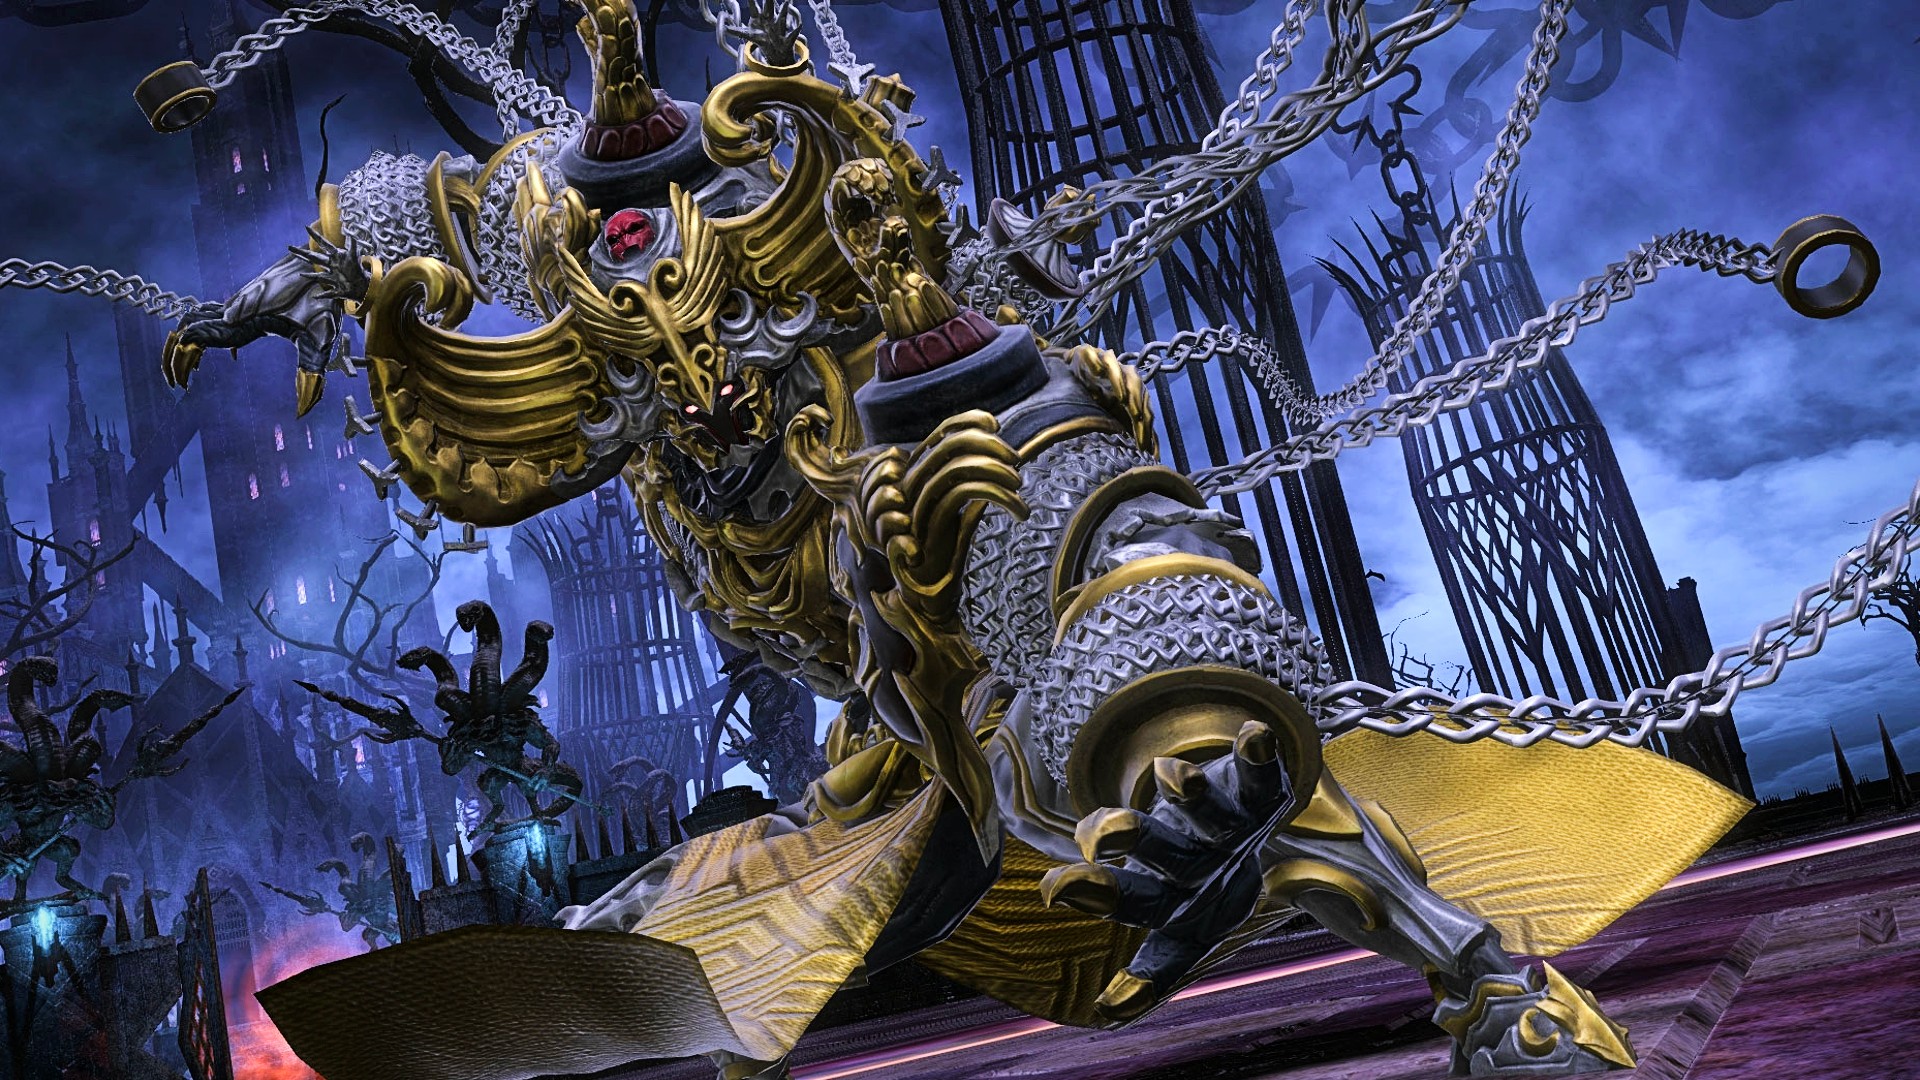 One of the bosses of Final Fantasy 14's Endwalker raid swings a chain at the opponent